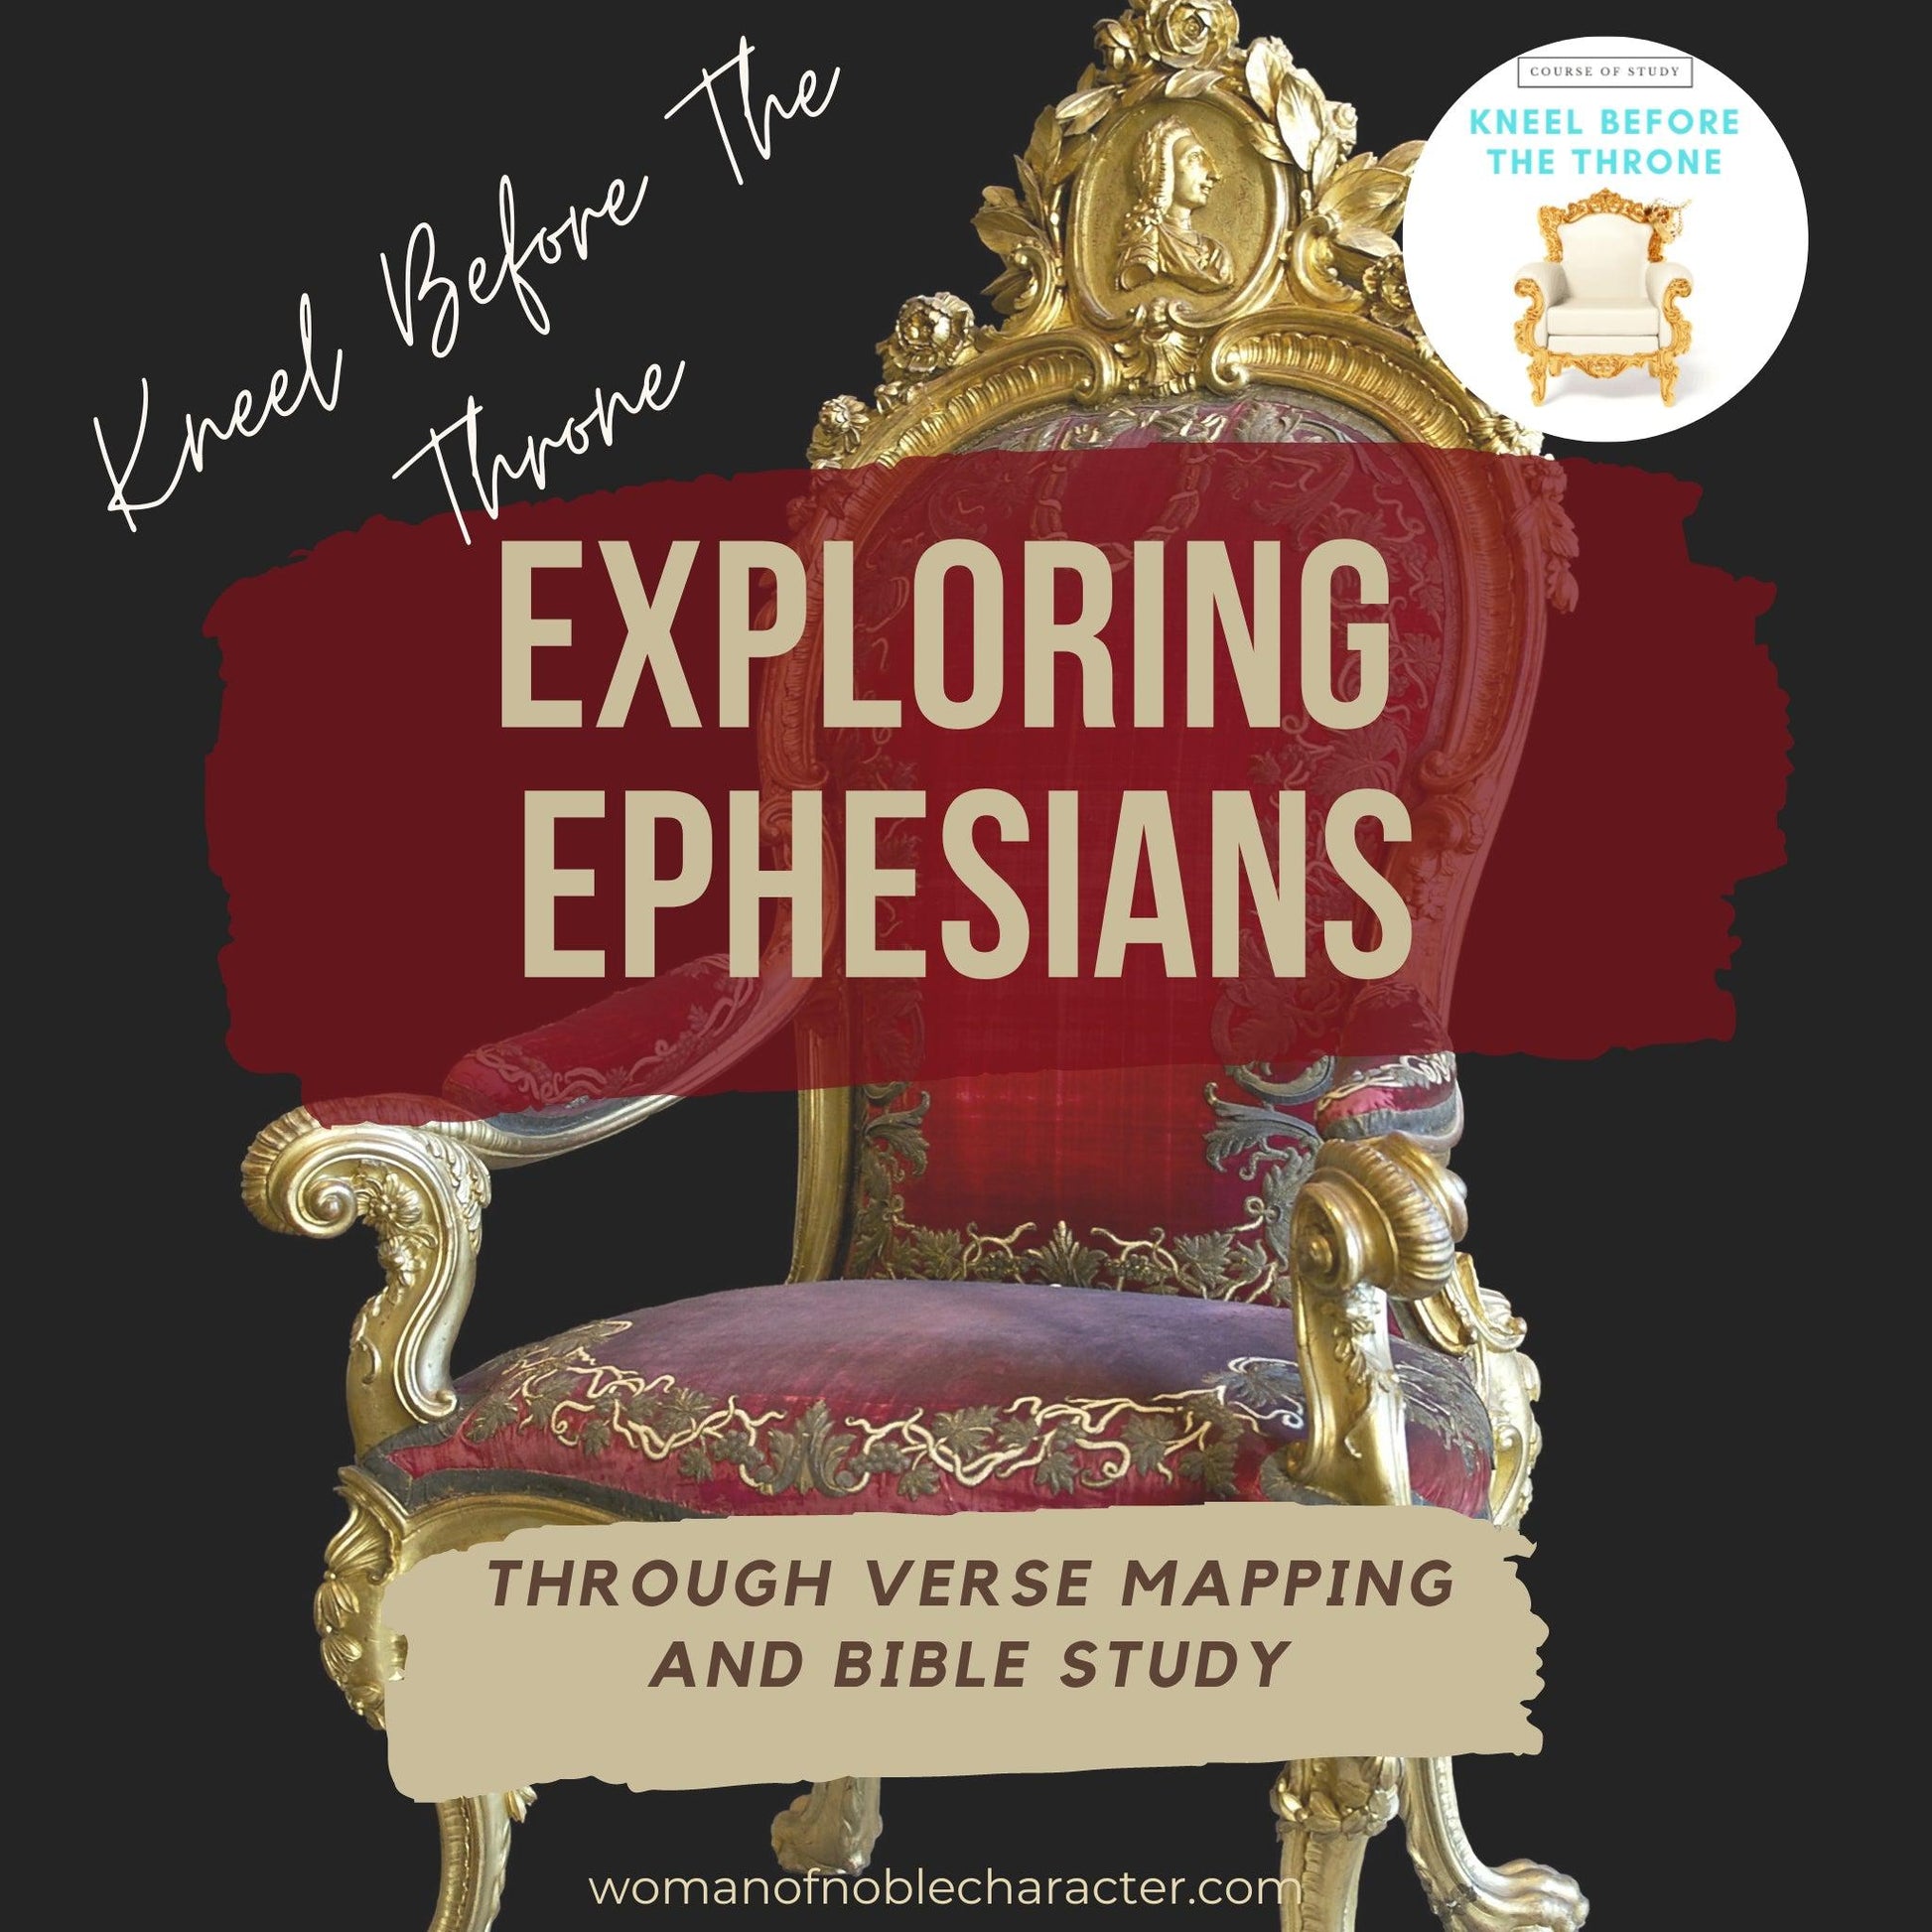 cover of course Kneel before the throne: Exploring Ephesians through verse mapping and Bible study